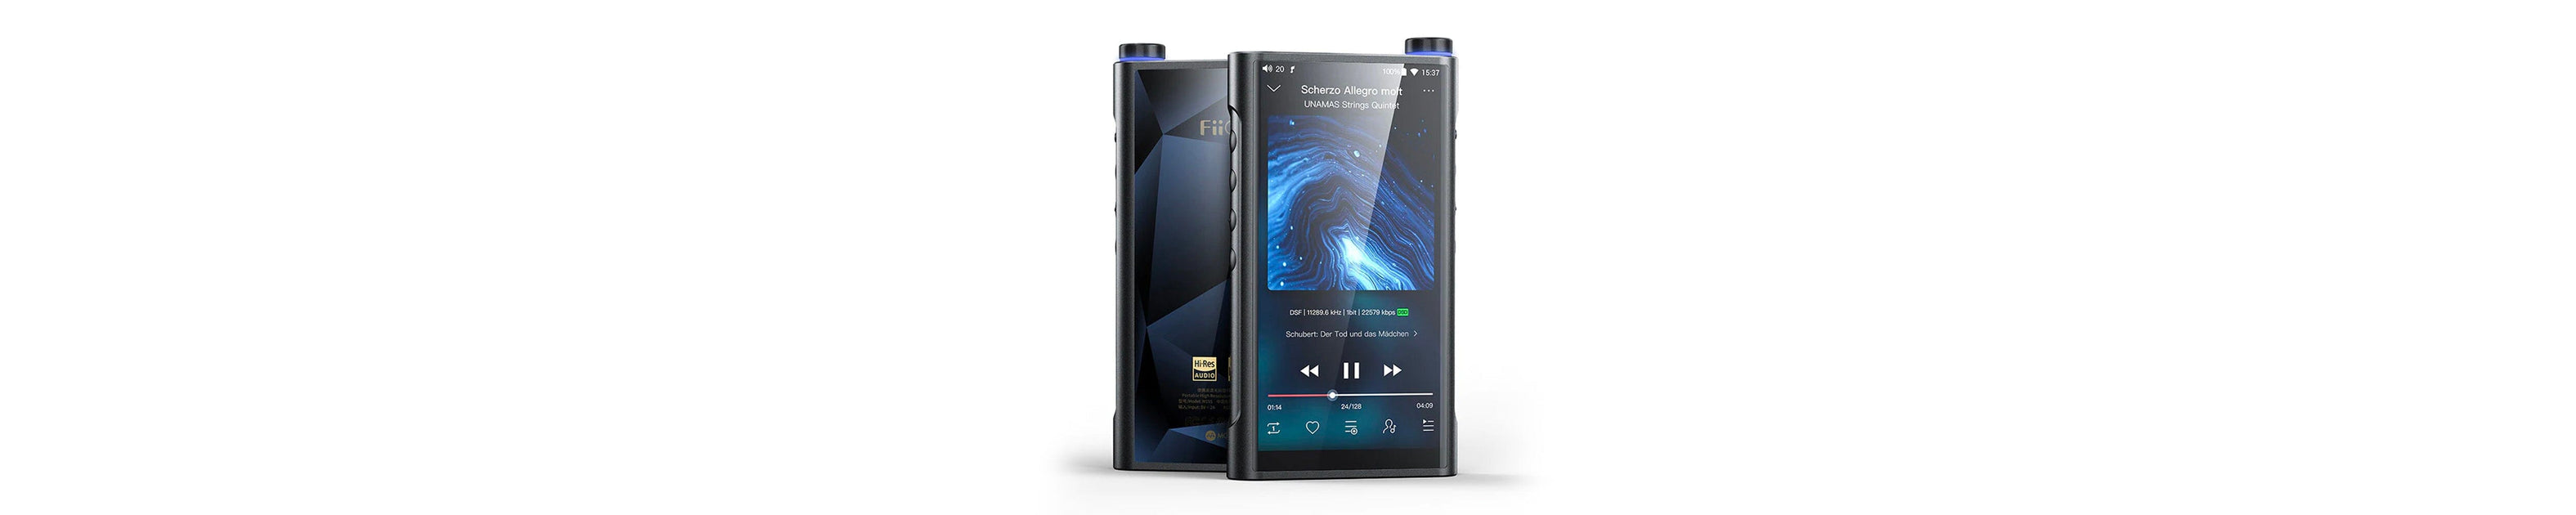 M15S Launched in China - FiiO - Roon Labs Community